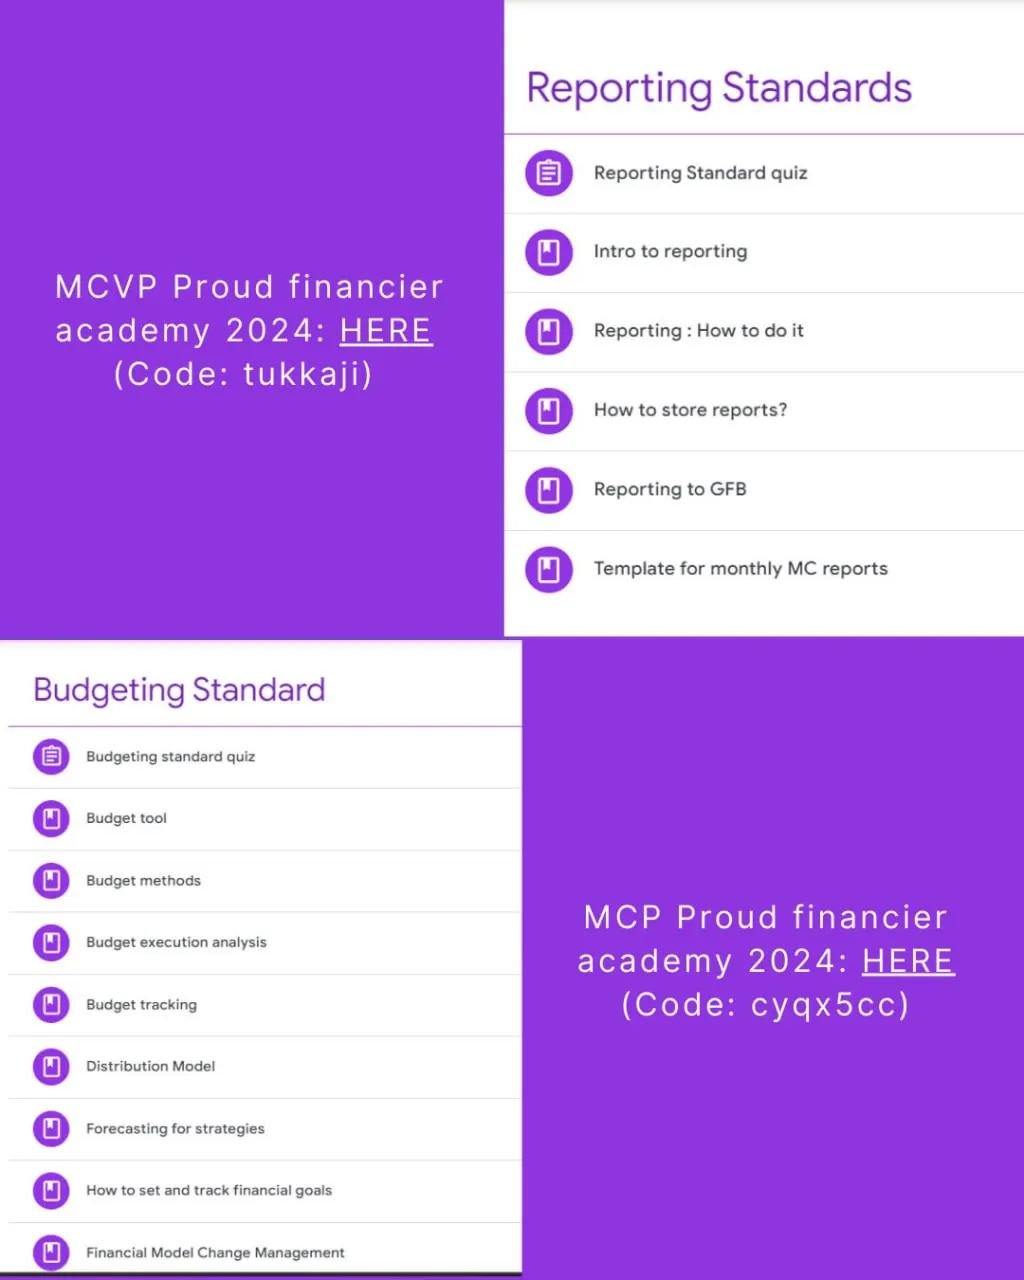 Our latest uploads on reporting and budgeting standards at Finance Academy! 💼

 Check it out now and level up your financial Knowldget.

- MCP Proud financier academy 2024: HERE (Code: cyqx5cc)
- MCVP Proud financier academy 2024:  HERE (Code: tukka